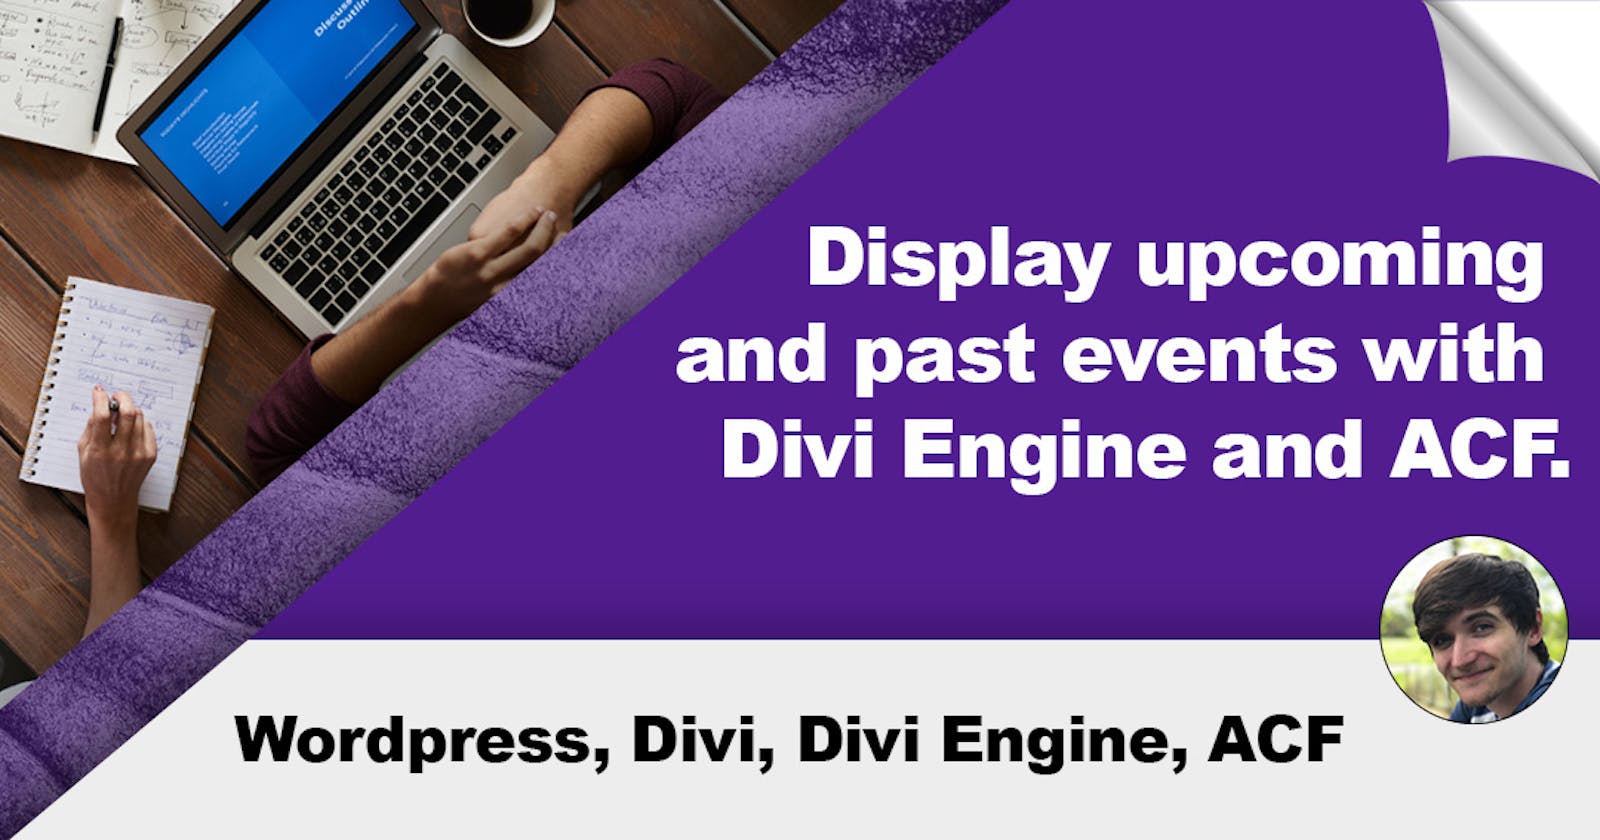 Display upcoming and past events with Divi Engine and ACF.